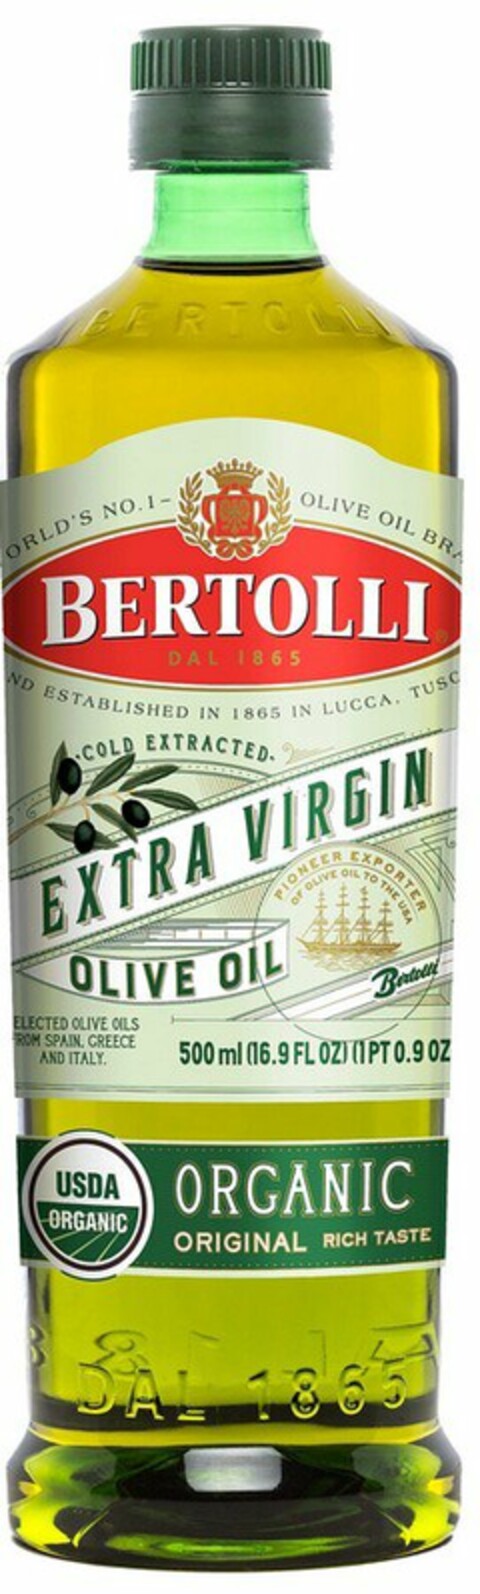 BERTOLLI DAL 1865 WORLD'S NO. 1 OLIVE OIL BRAND BRAND ESTABLISHED IN 1865 IN LUCCA, TUSCANY COLD EXTRACTED EXTRA VIRGIN OLIVE OIL SELECTED OLIVE OILS FROM SPAIN AND TUNISIA. PIONEER EXPORTER OF OLIVE OIL TO THE USA USDA ORGANIC ORGANIC ORIGINAL RICH TASTE 500 ML (16.9 FL OZ) (1PT 0.9 OZ) Logo (USPTO, 27.04.2018)